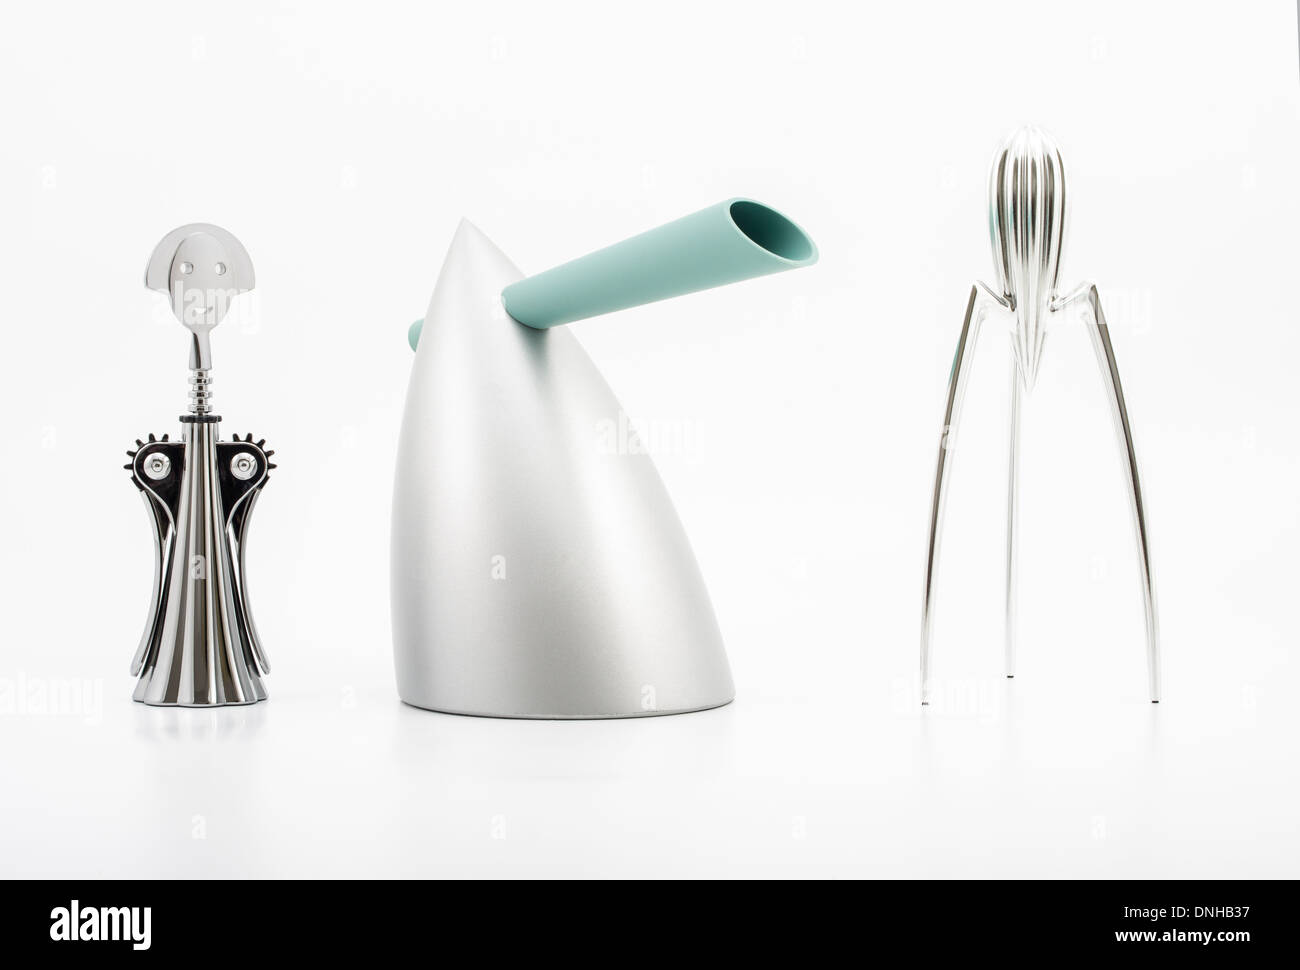 Anna G. Corkscrew, HOT BERTAA / Water Kettle, Alessi Juicy Salif Citrus Squeezer  Designed by Philippe Starck for Alessi. Stock Photo